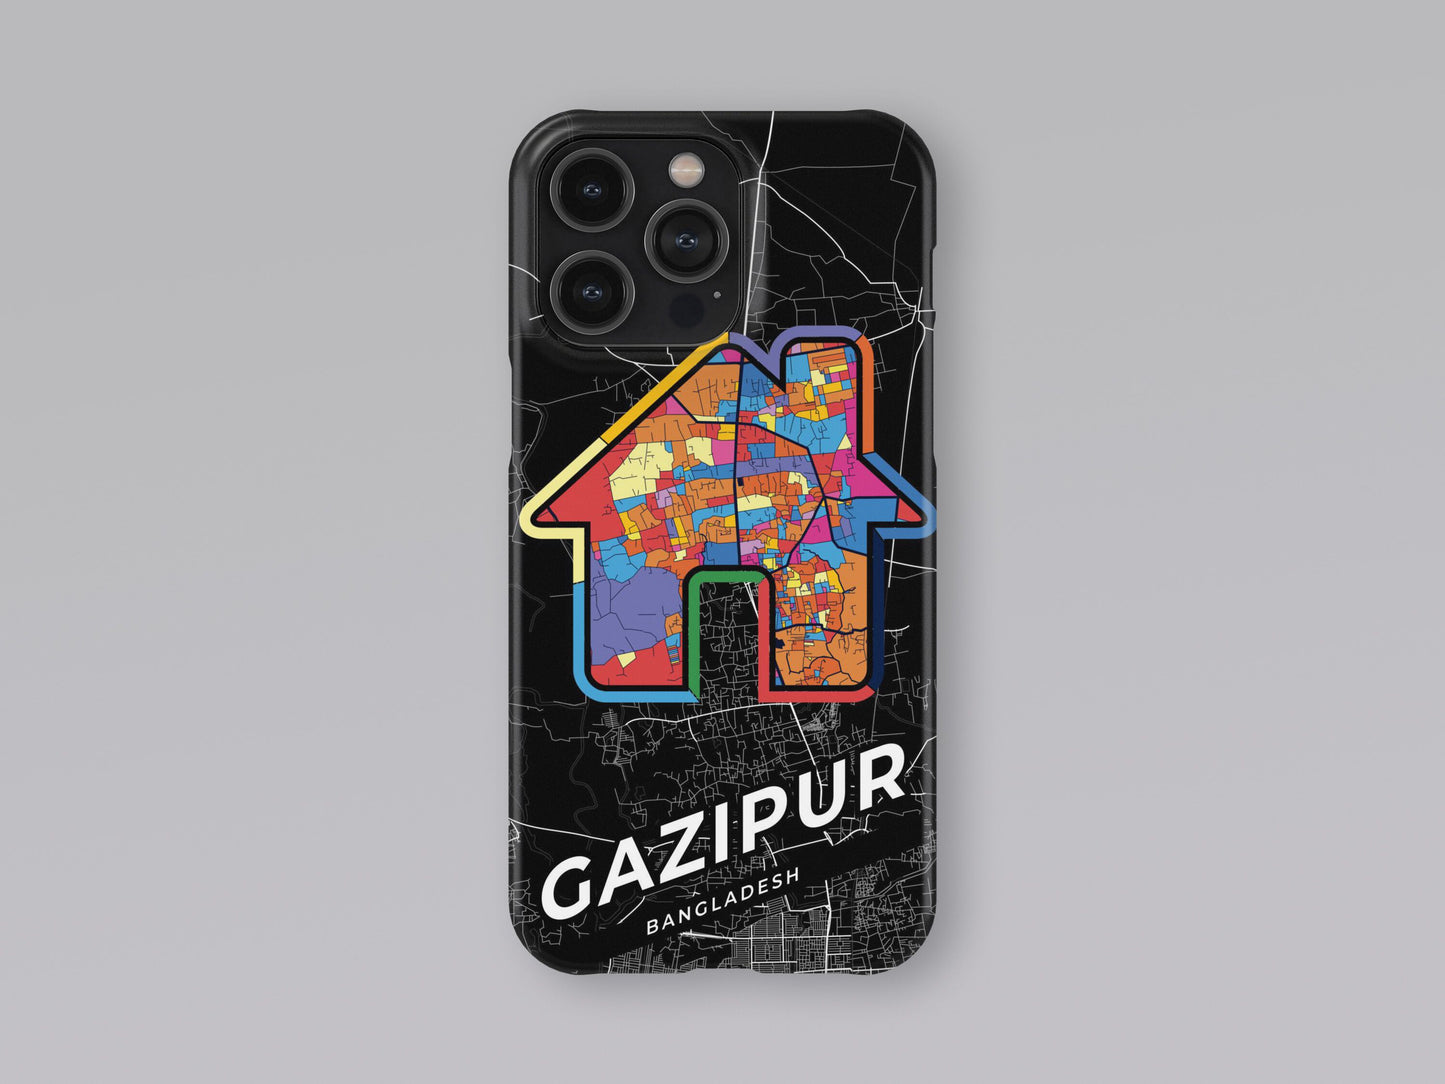 Gazipur Bangladesh slim phone case with colorful icon. Birthday, wedding or housewarming gift. Couple match cases. 3